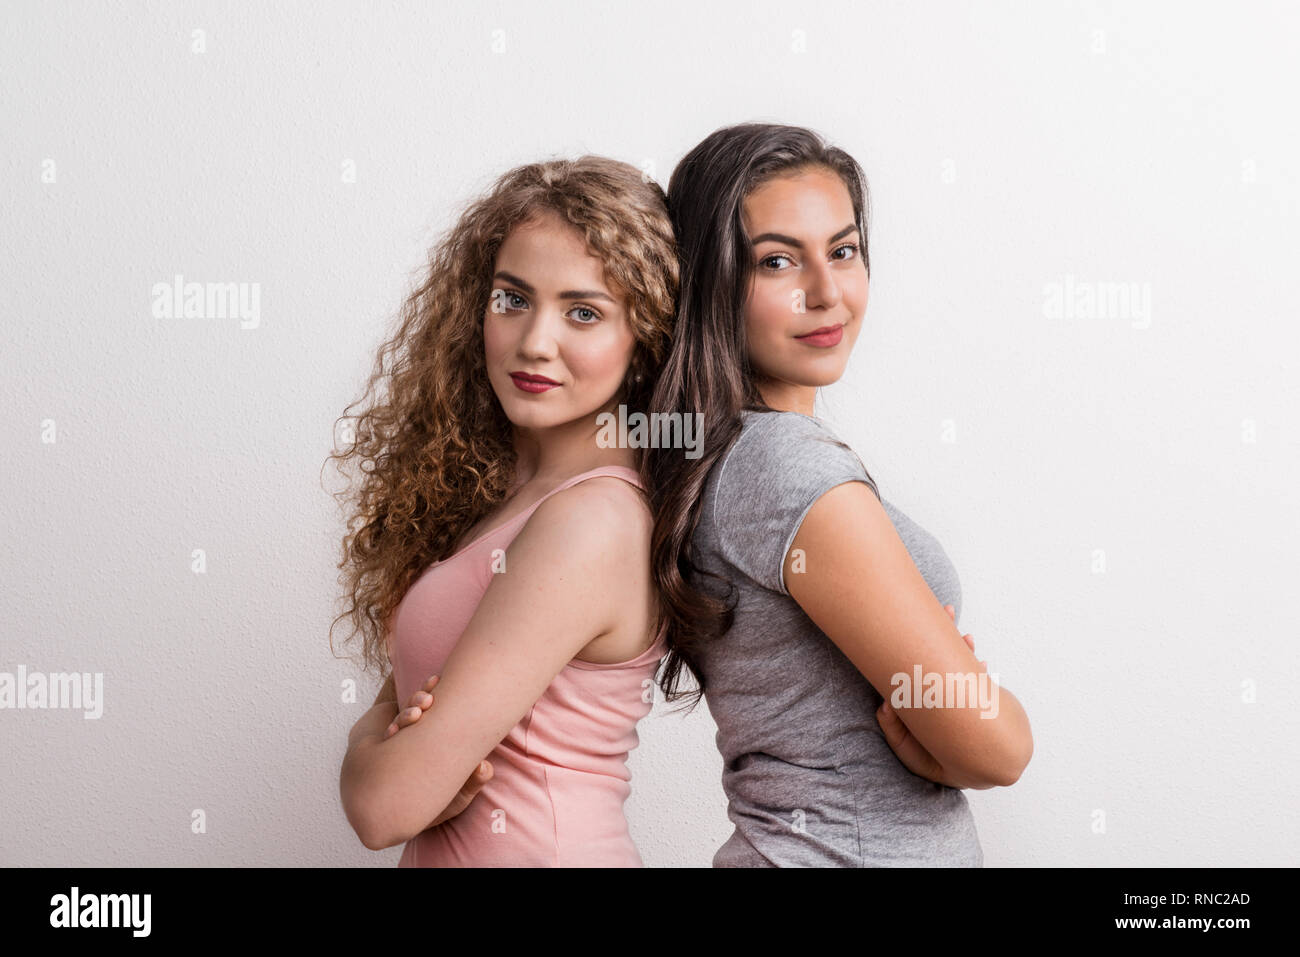 Young beautiful women in studio, standing back to back with arms crossed. Stock Photo